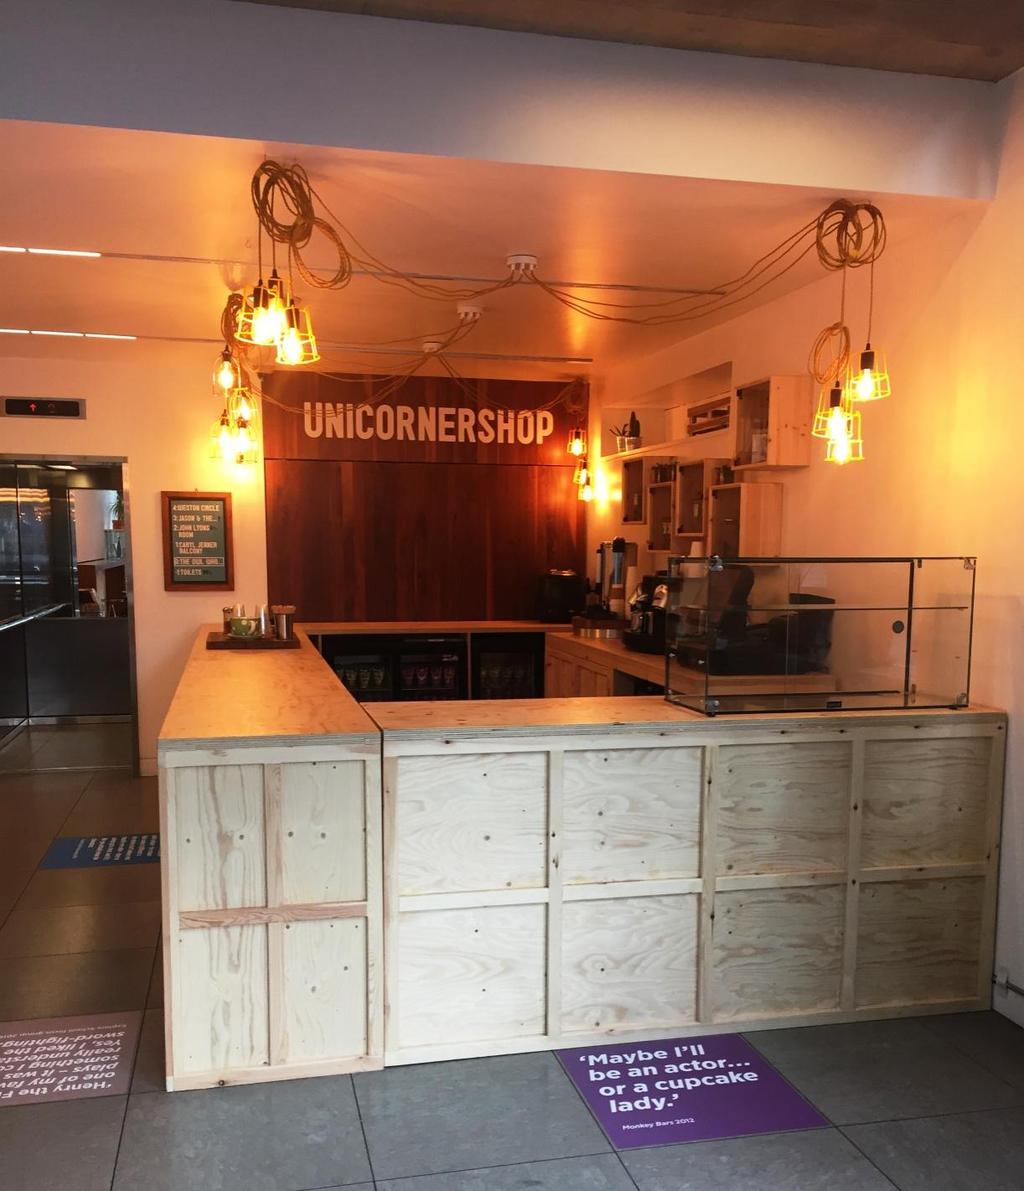 There is a cafe in the Foyer called the Unicornershop where you can buy drinks and snacks.